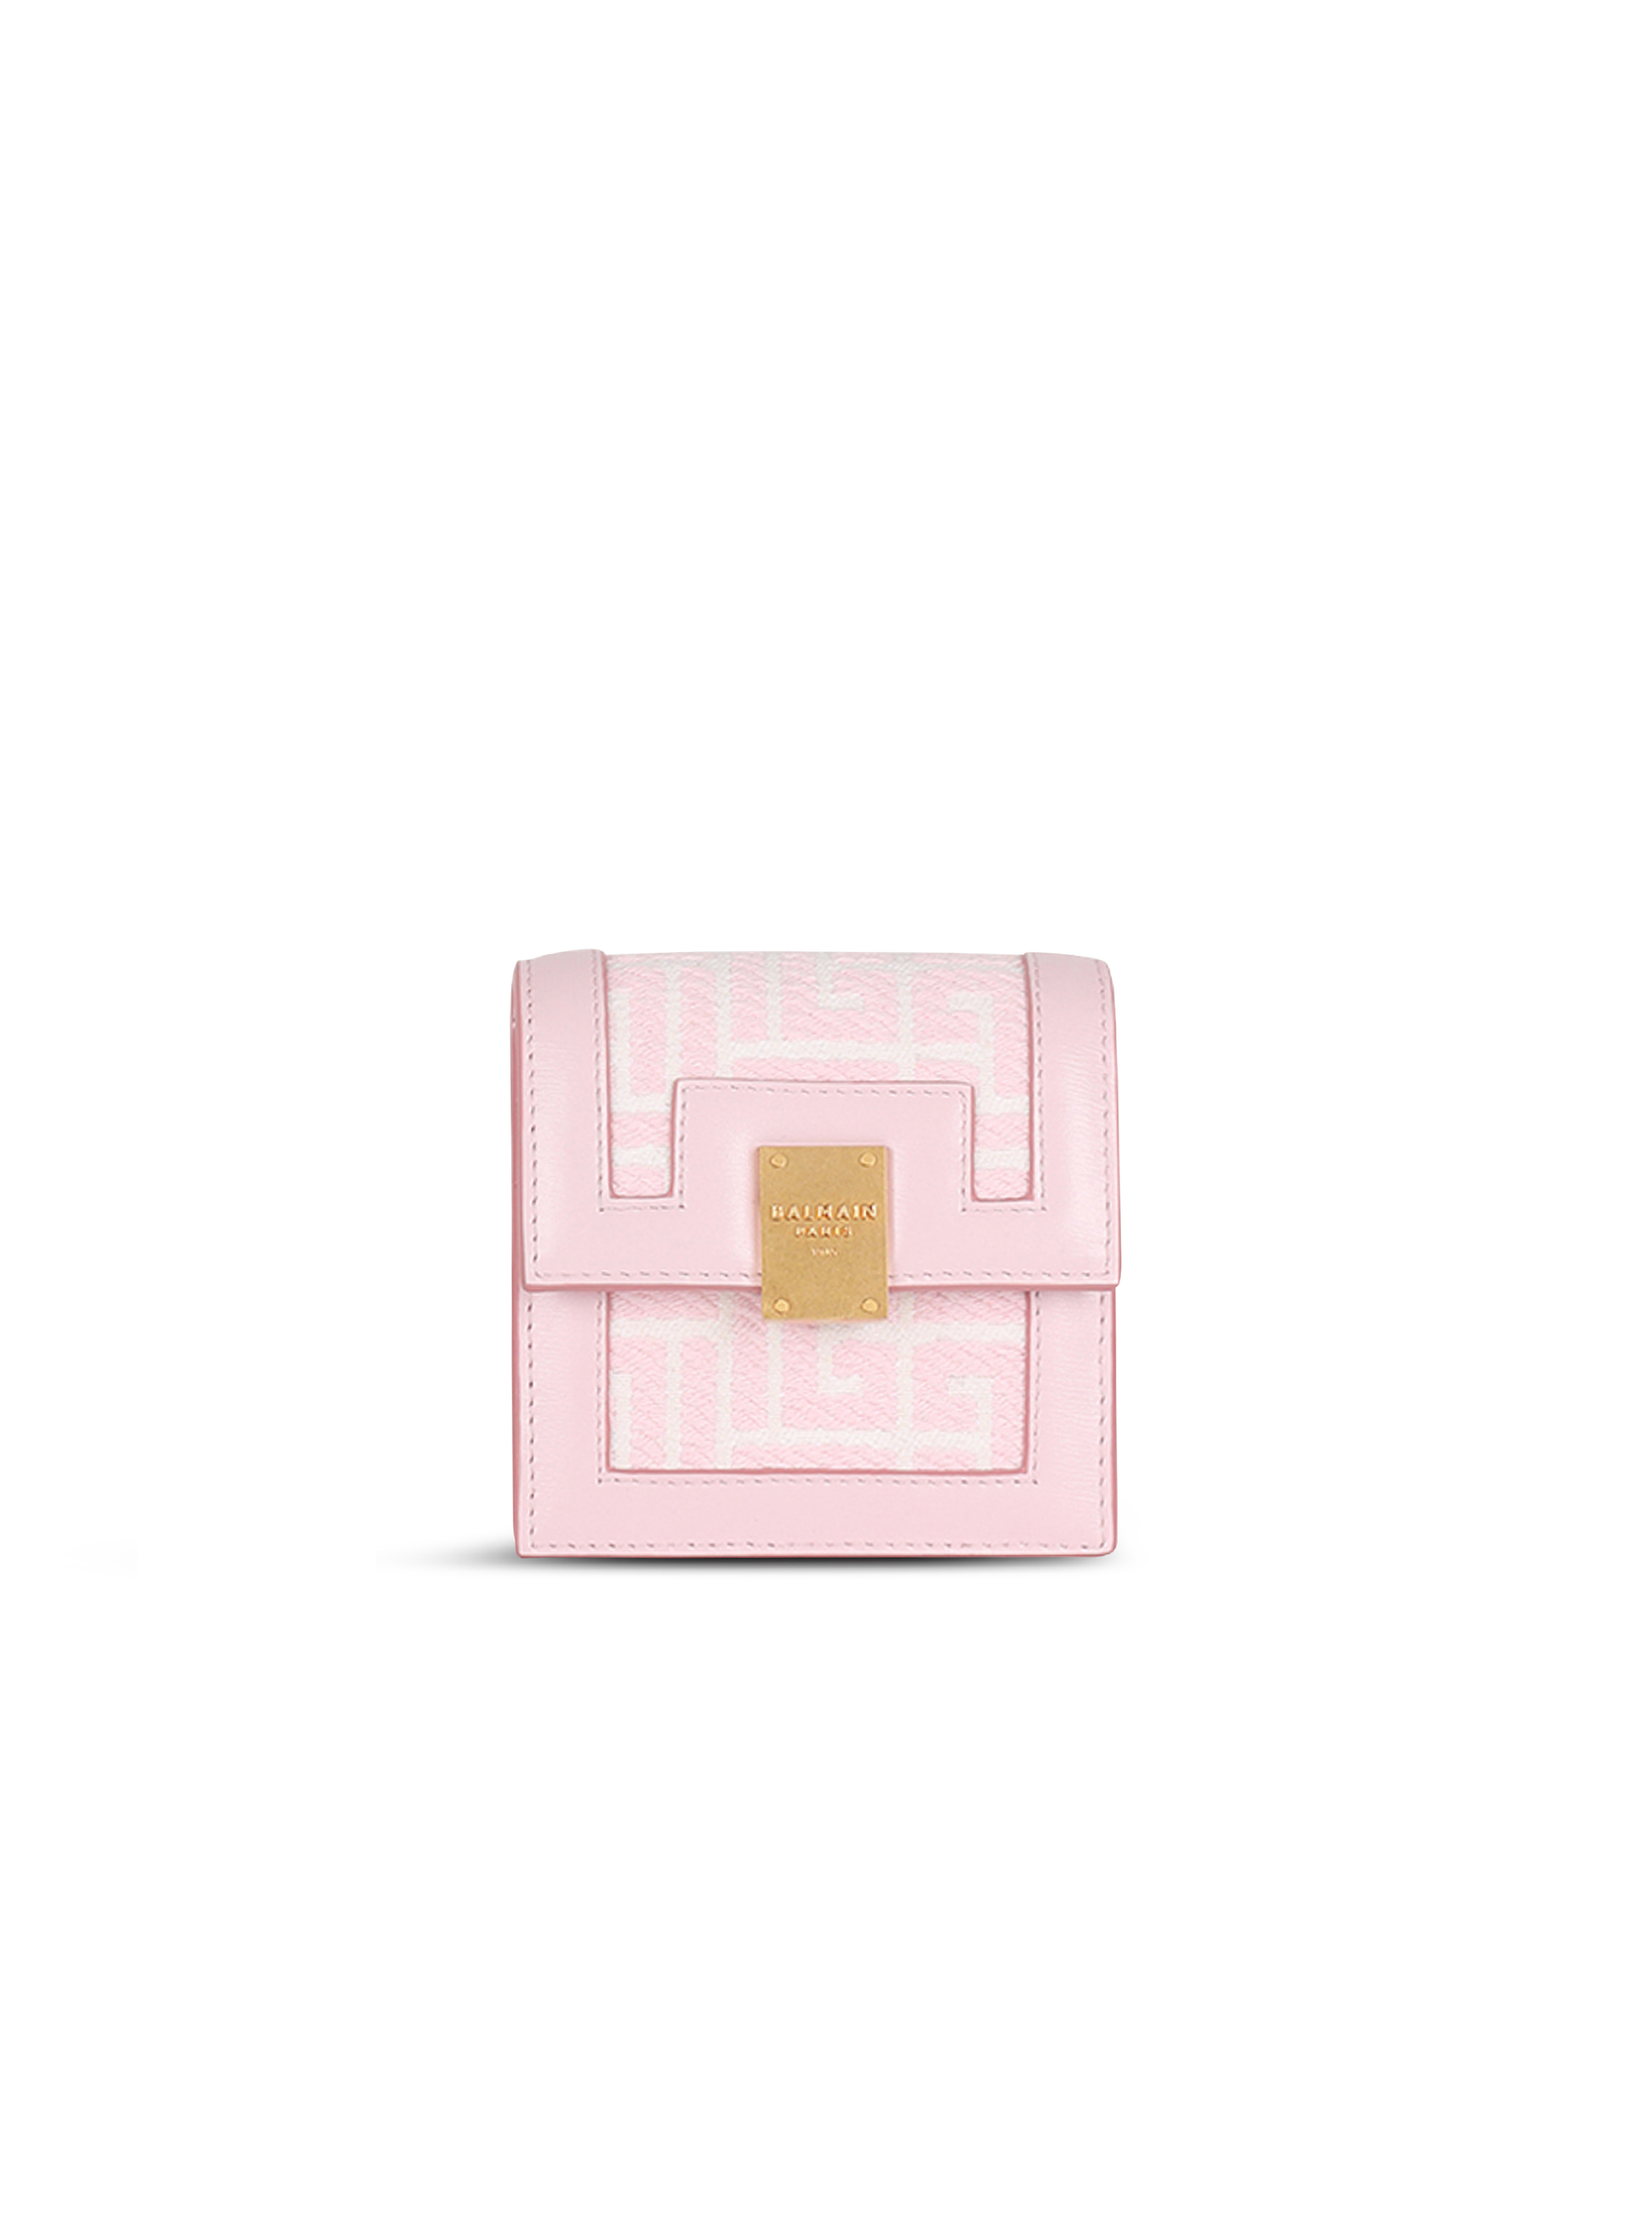 Bicolor jacquard 1945 card holder with chain, pink